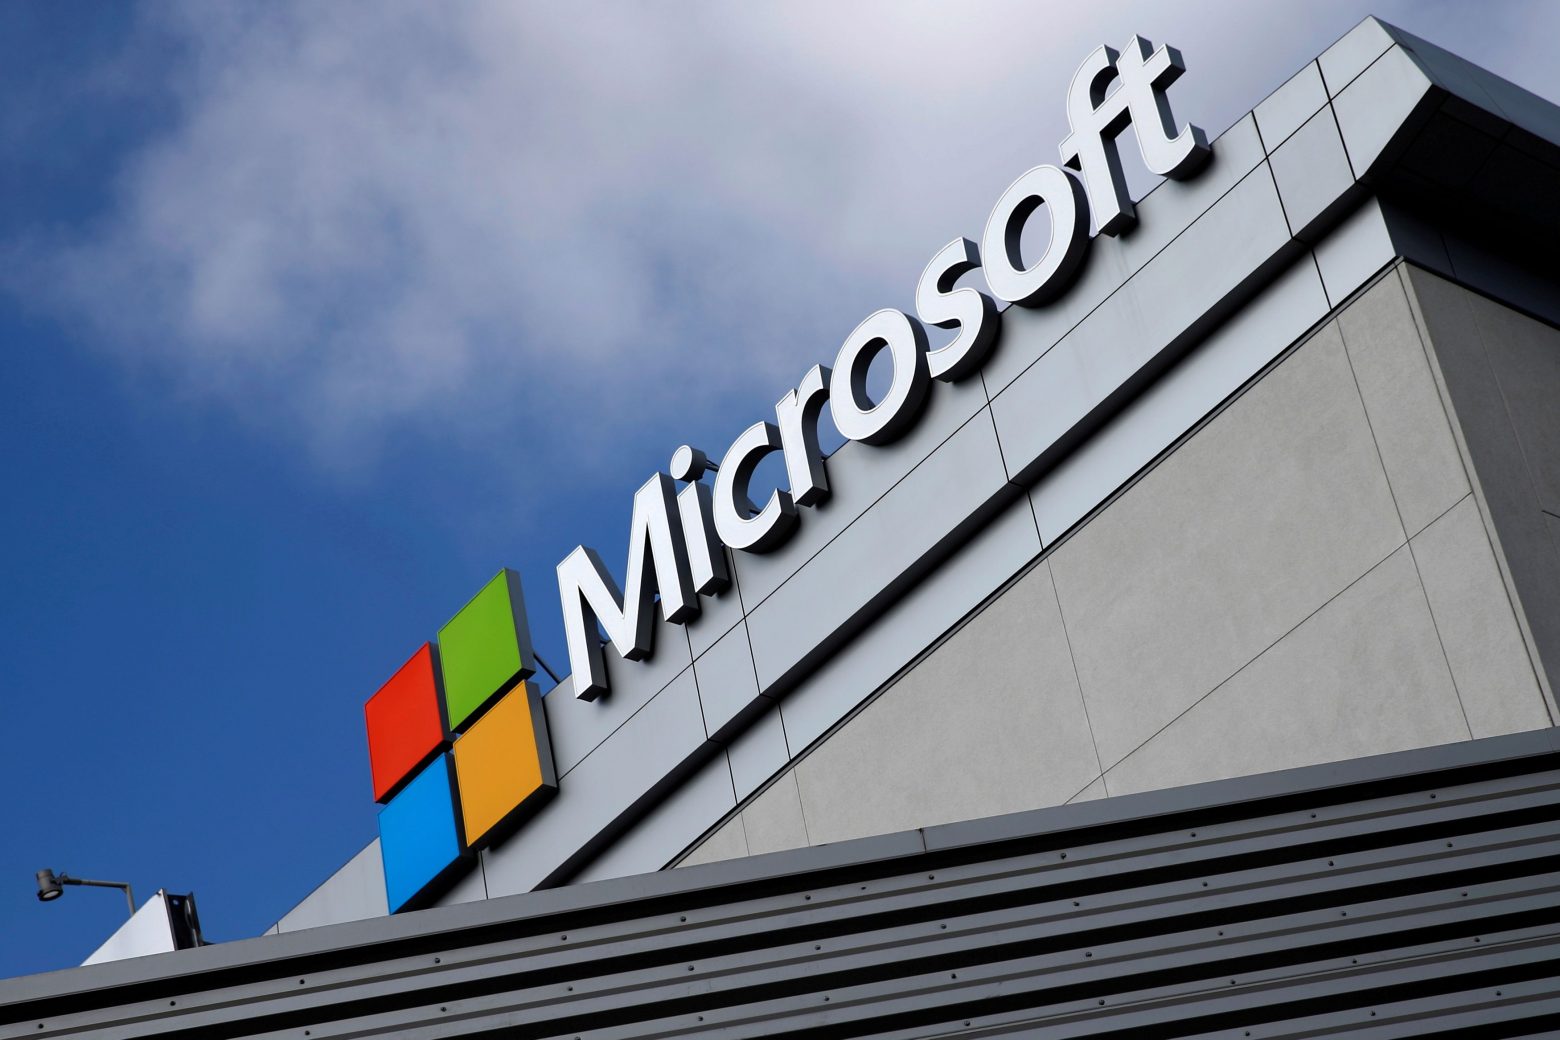 The 3 Microsoft Data Centers in Spata and Koropi are on the way